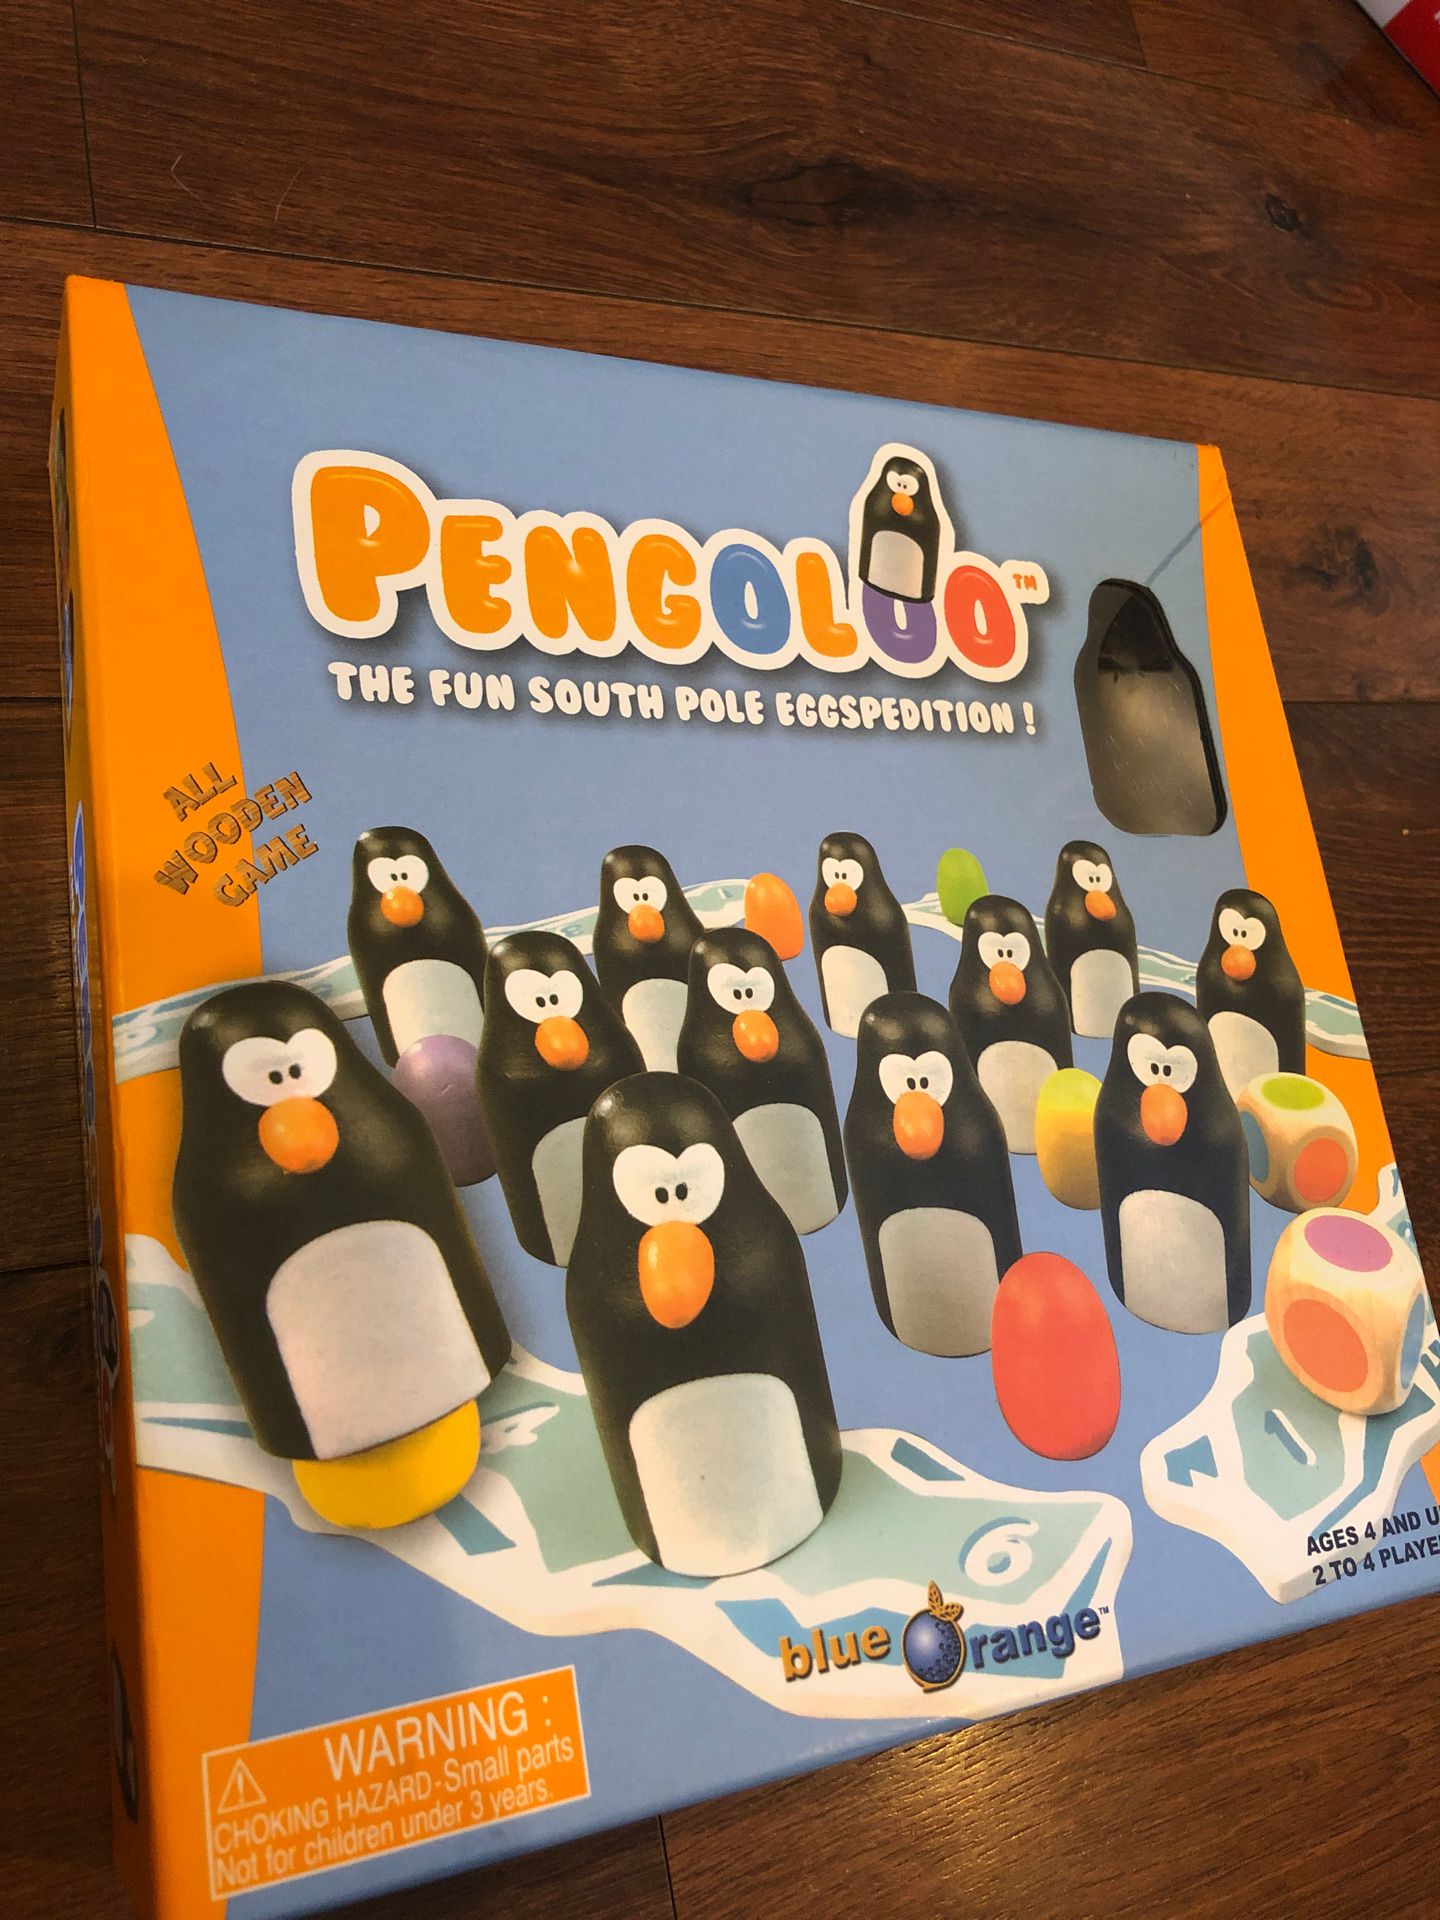 Pengoloo wooden game - ages 4 and up- 2 to 4 players